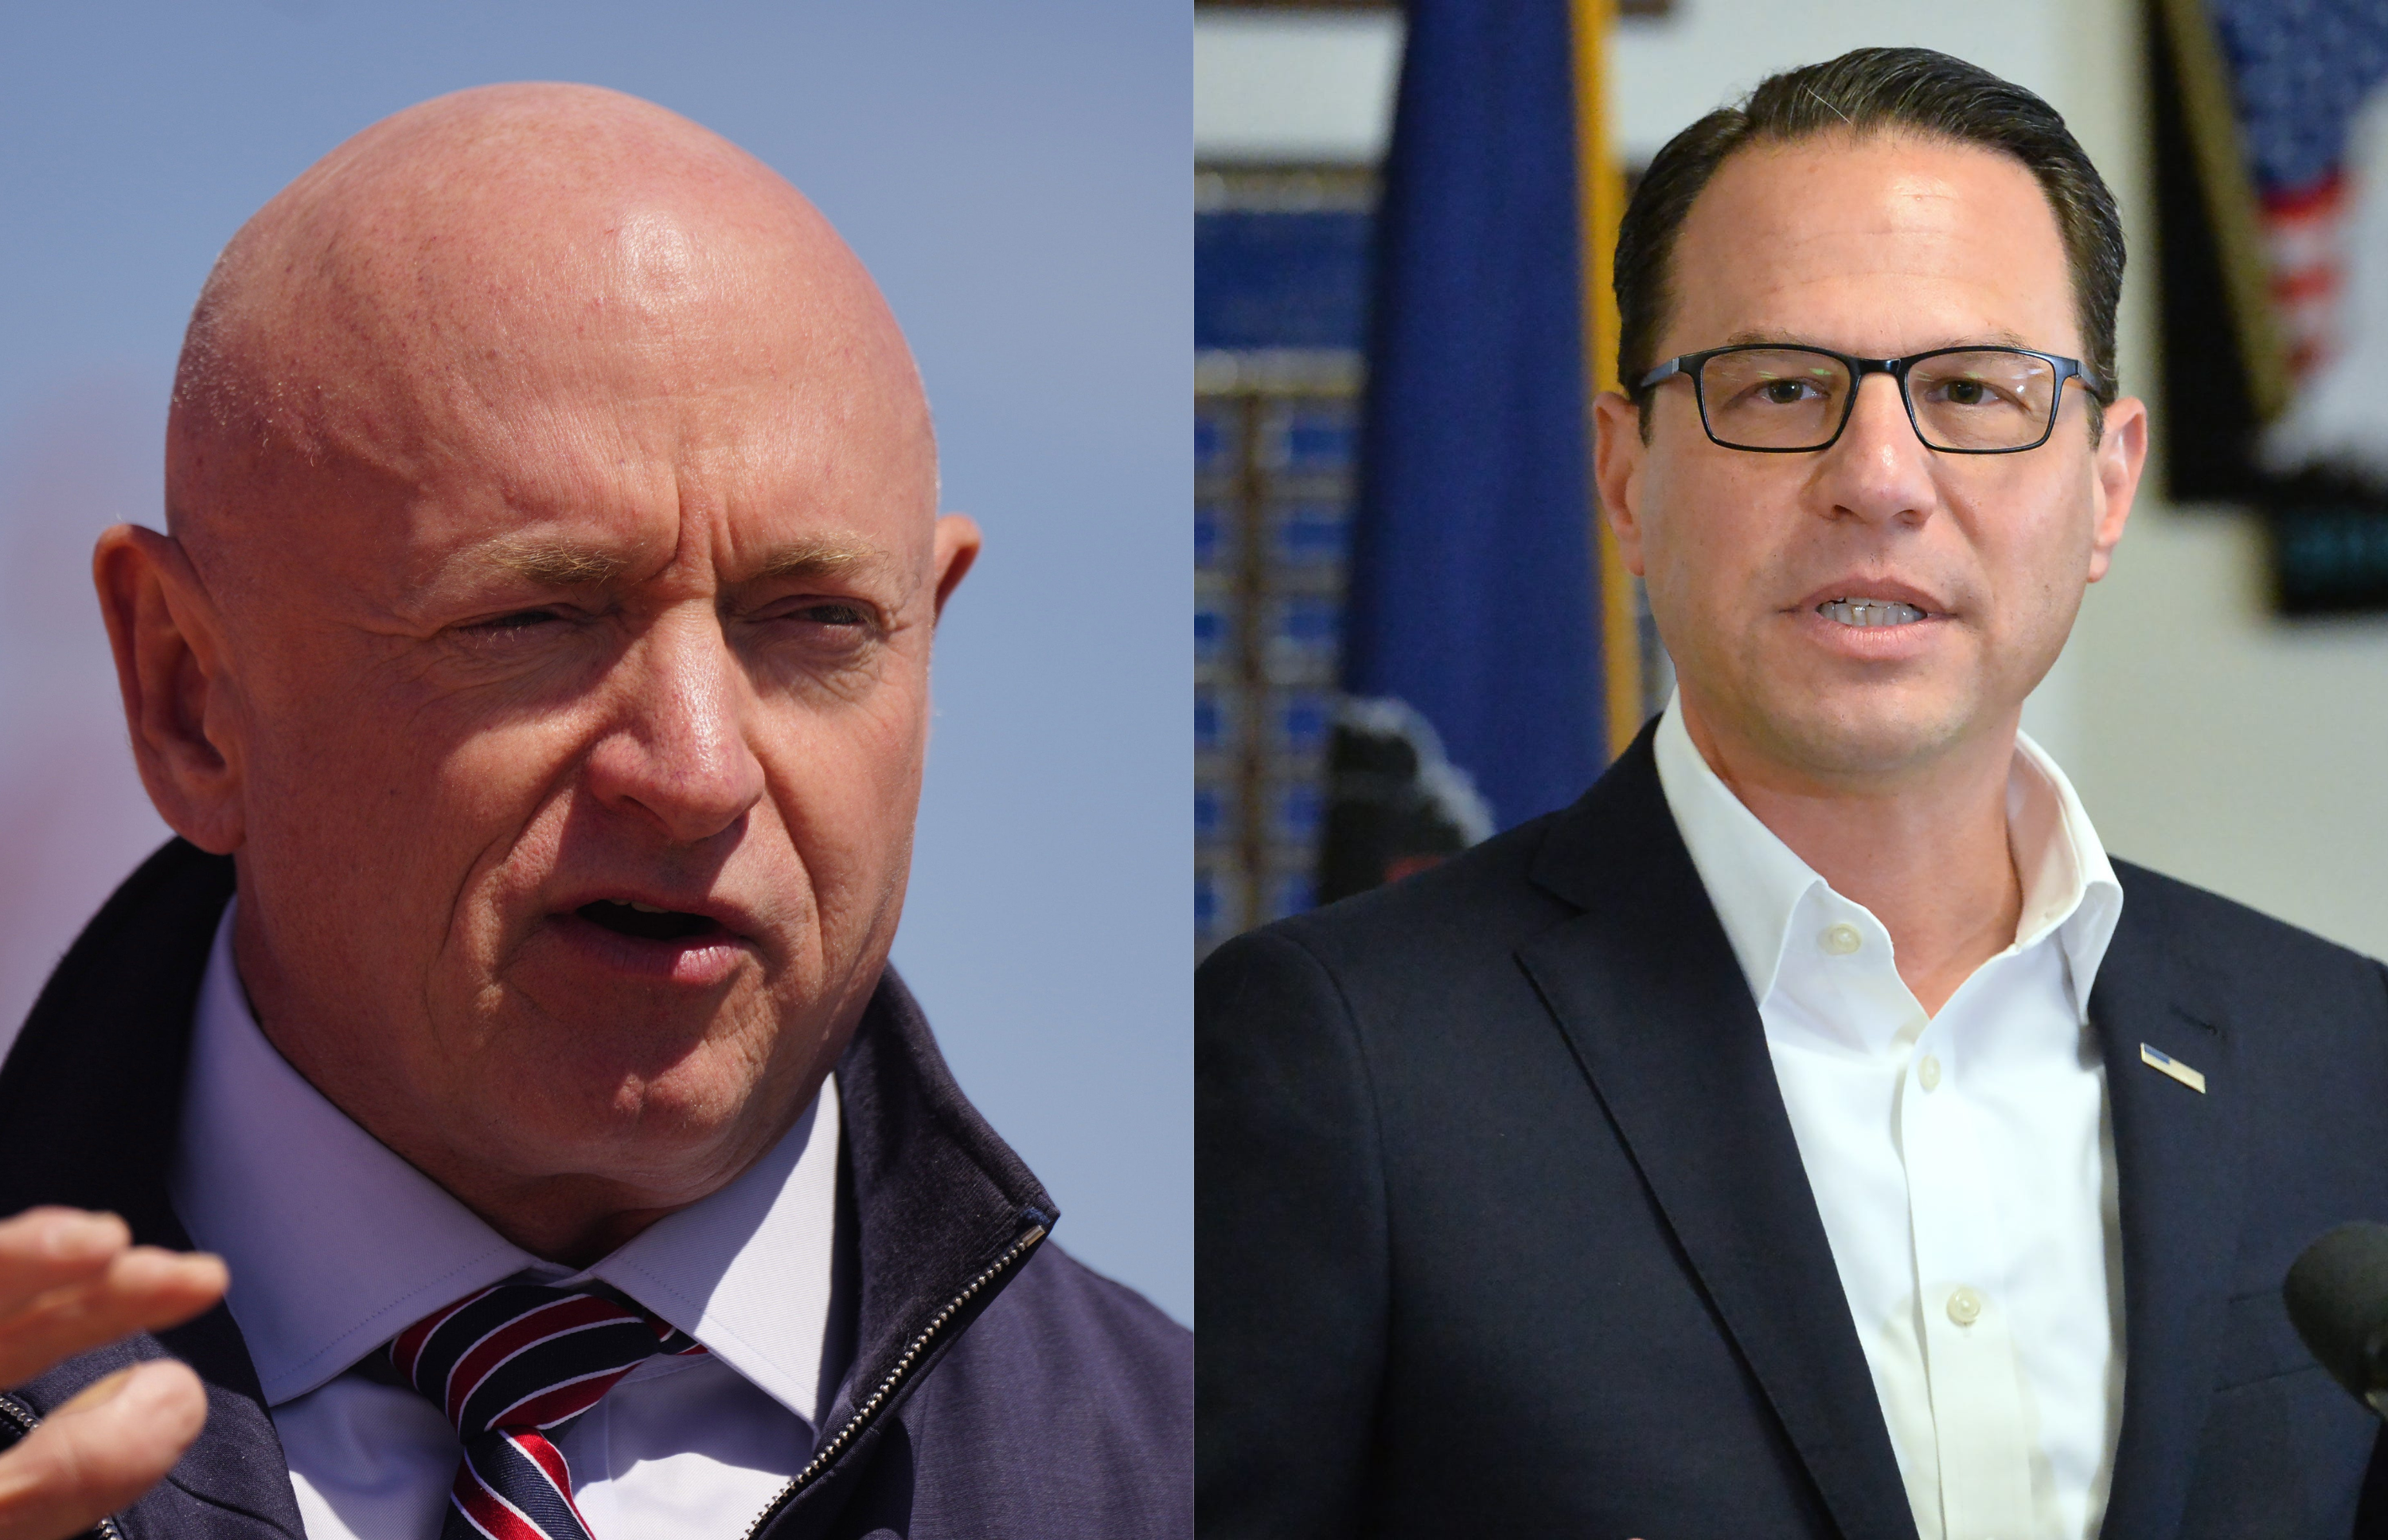 Kelly, Shapiro remain at top of betting odds for Harris' VP pick, Walz makes gains